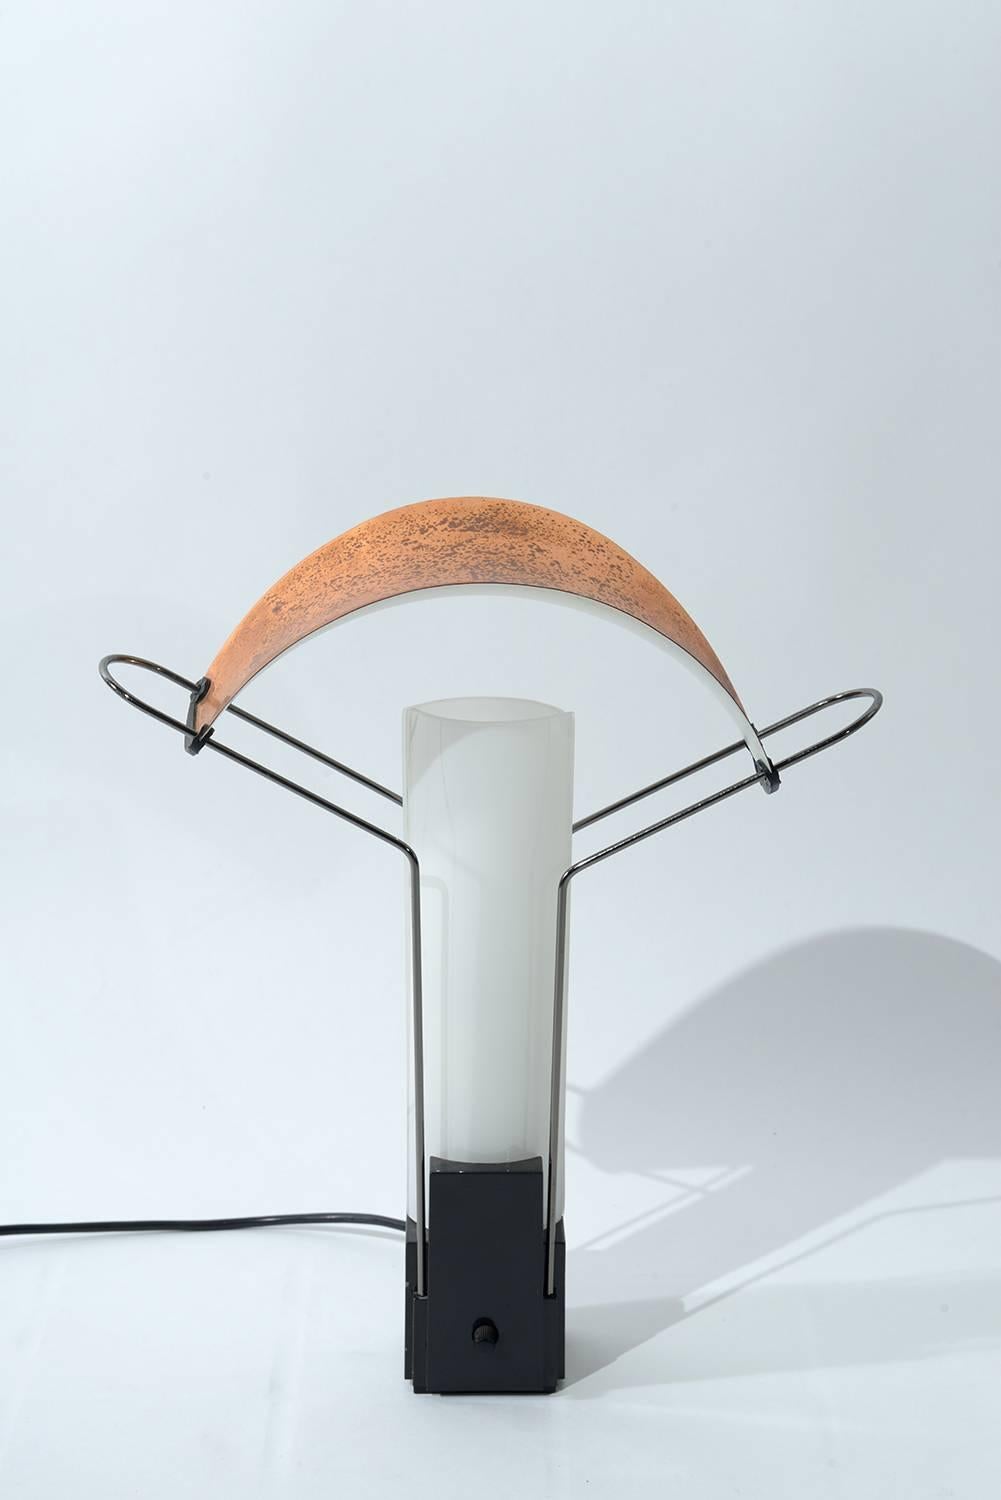 KIng e Miranda Lamp ,Plastic base diffuser on glass and reflector on metal and copper.
Signed Arteluce, Palio, made in Italy, 1985.